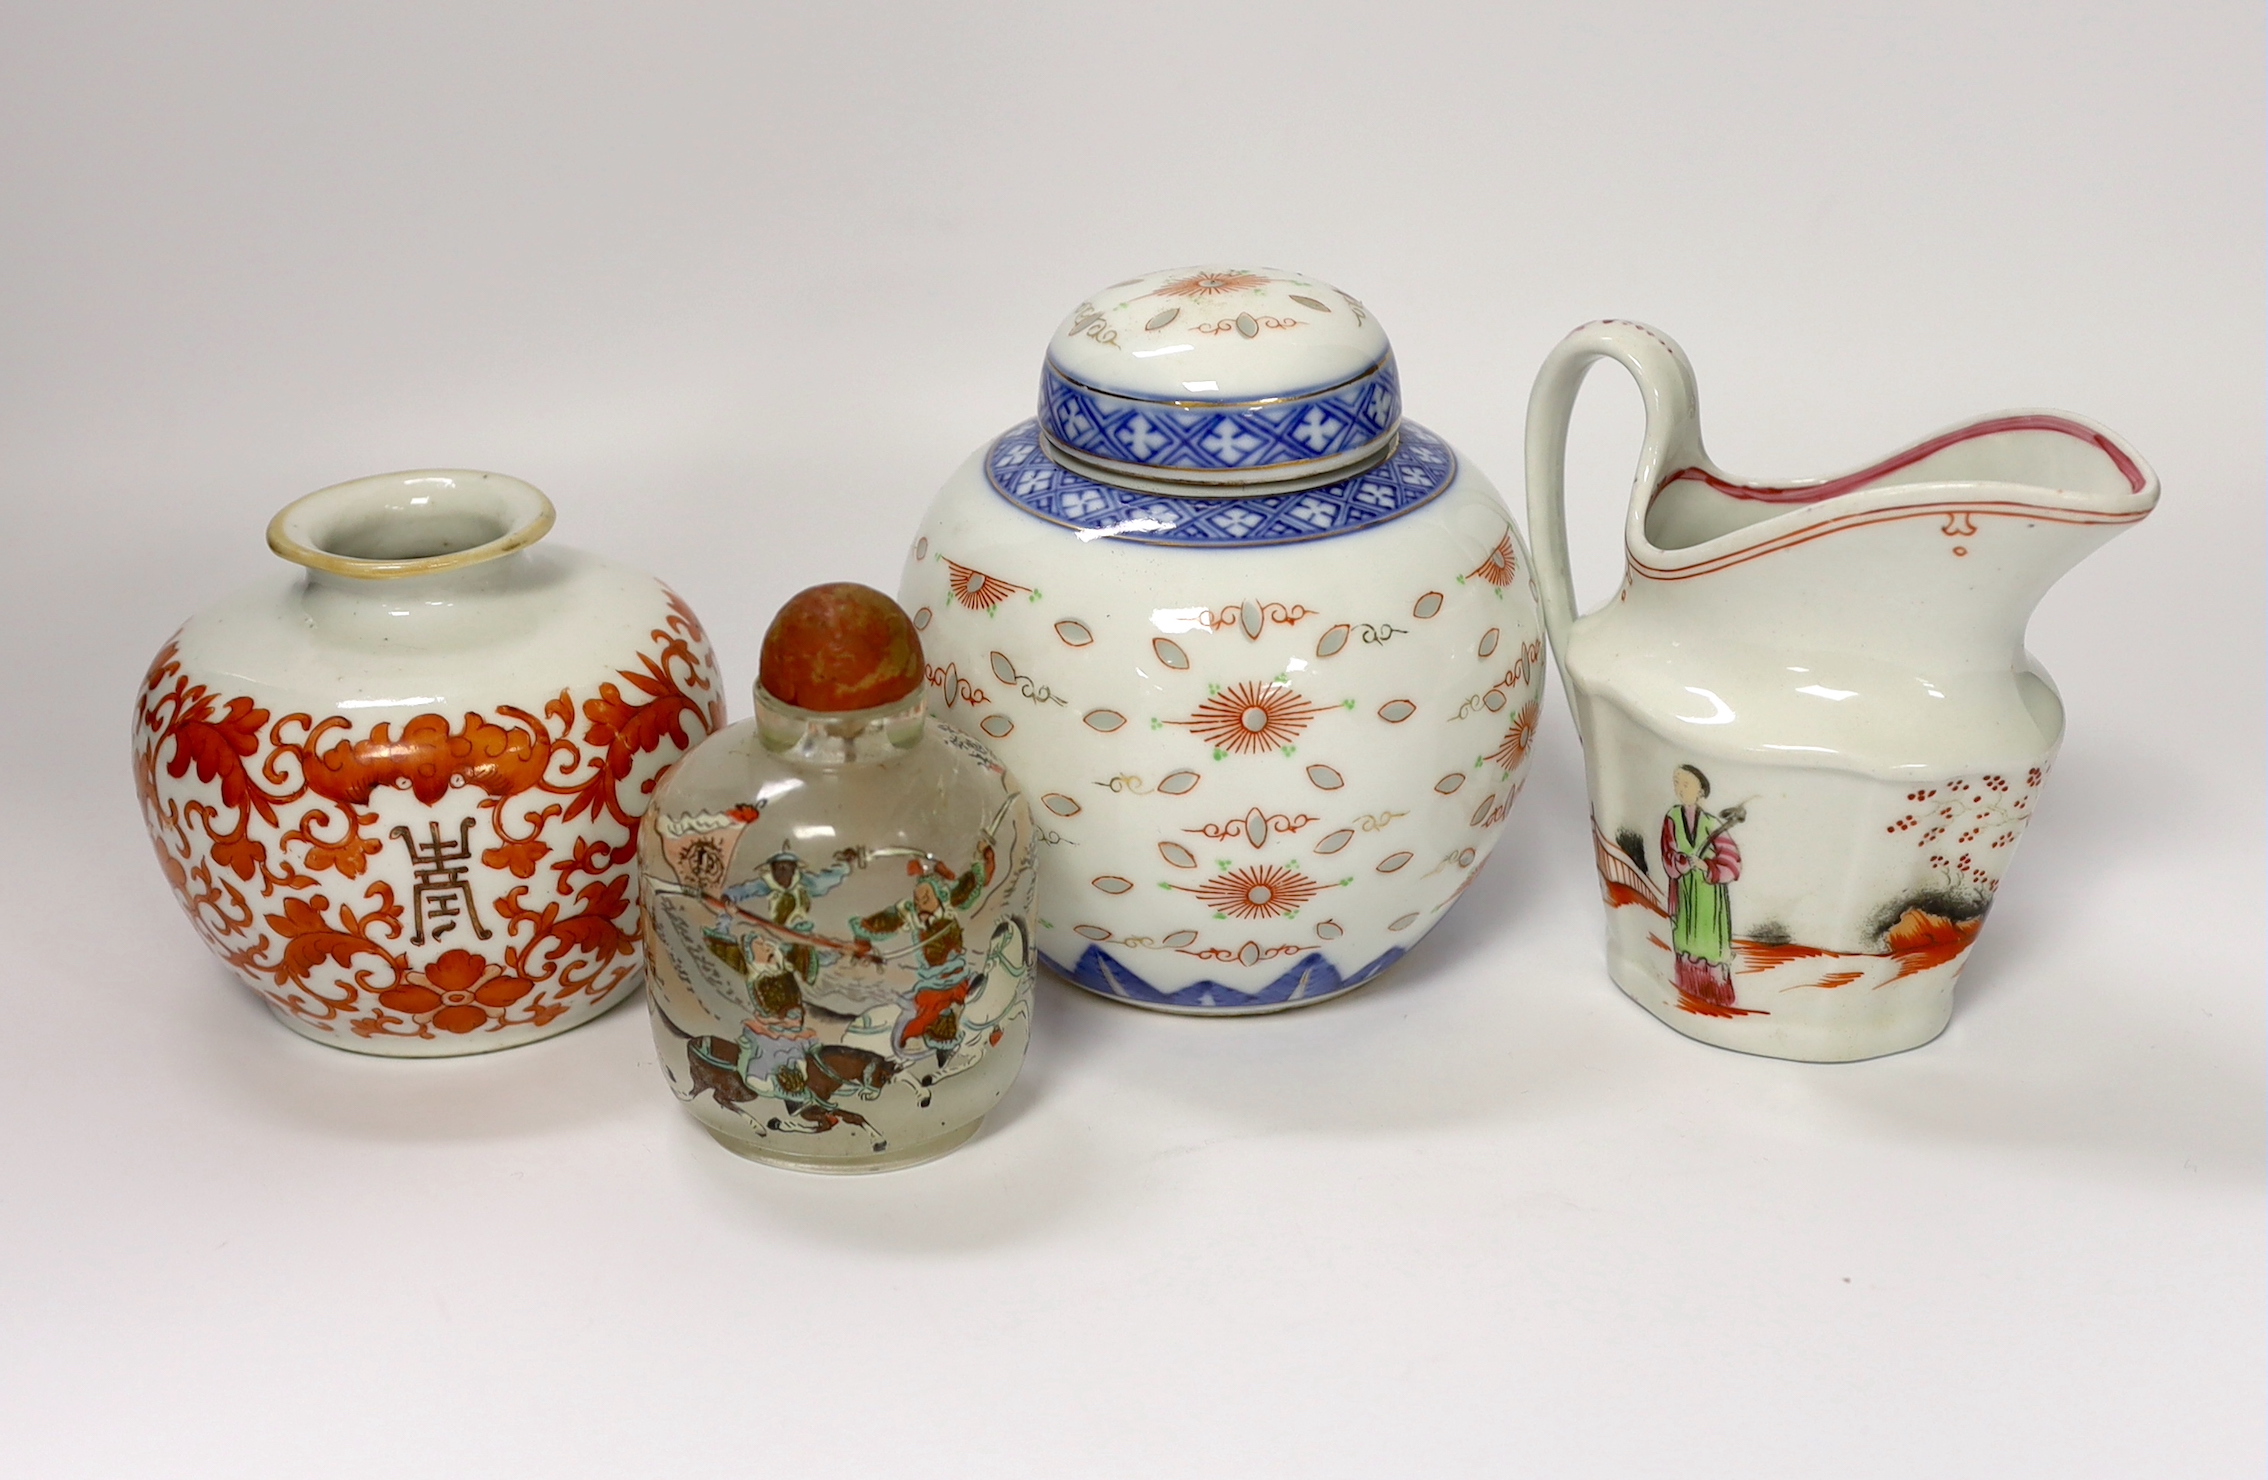 A late 18th century Newhall type jug, an early 20th century Chinese underglaze copper jar, a jar and cover and a glass snuff bottle